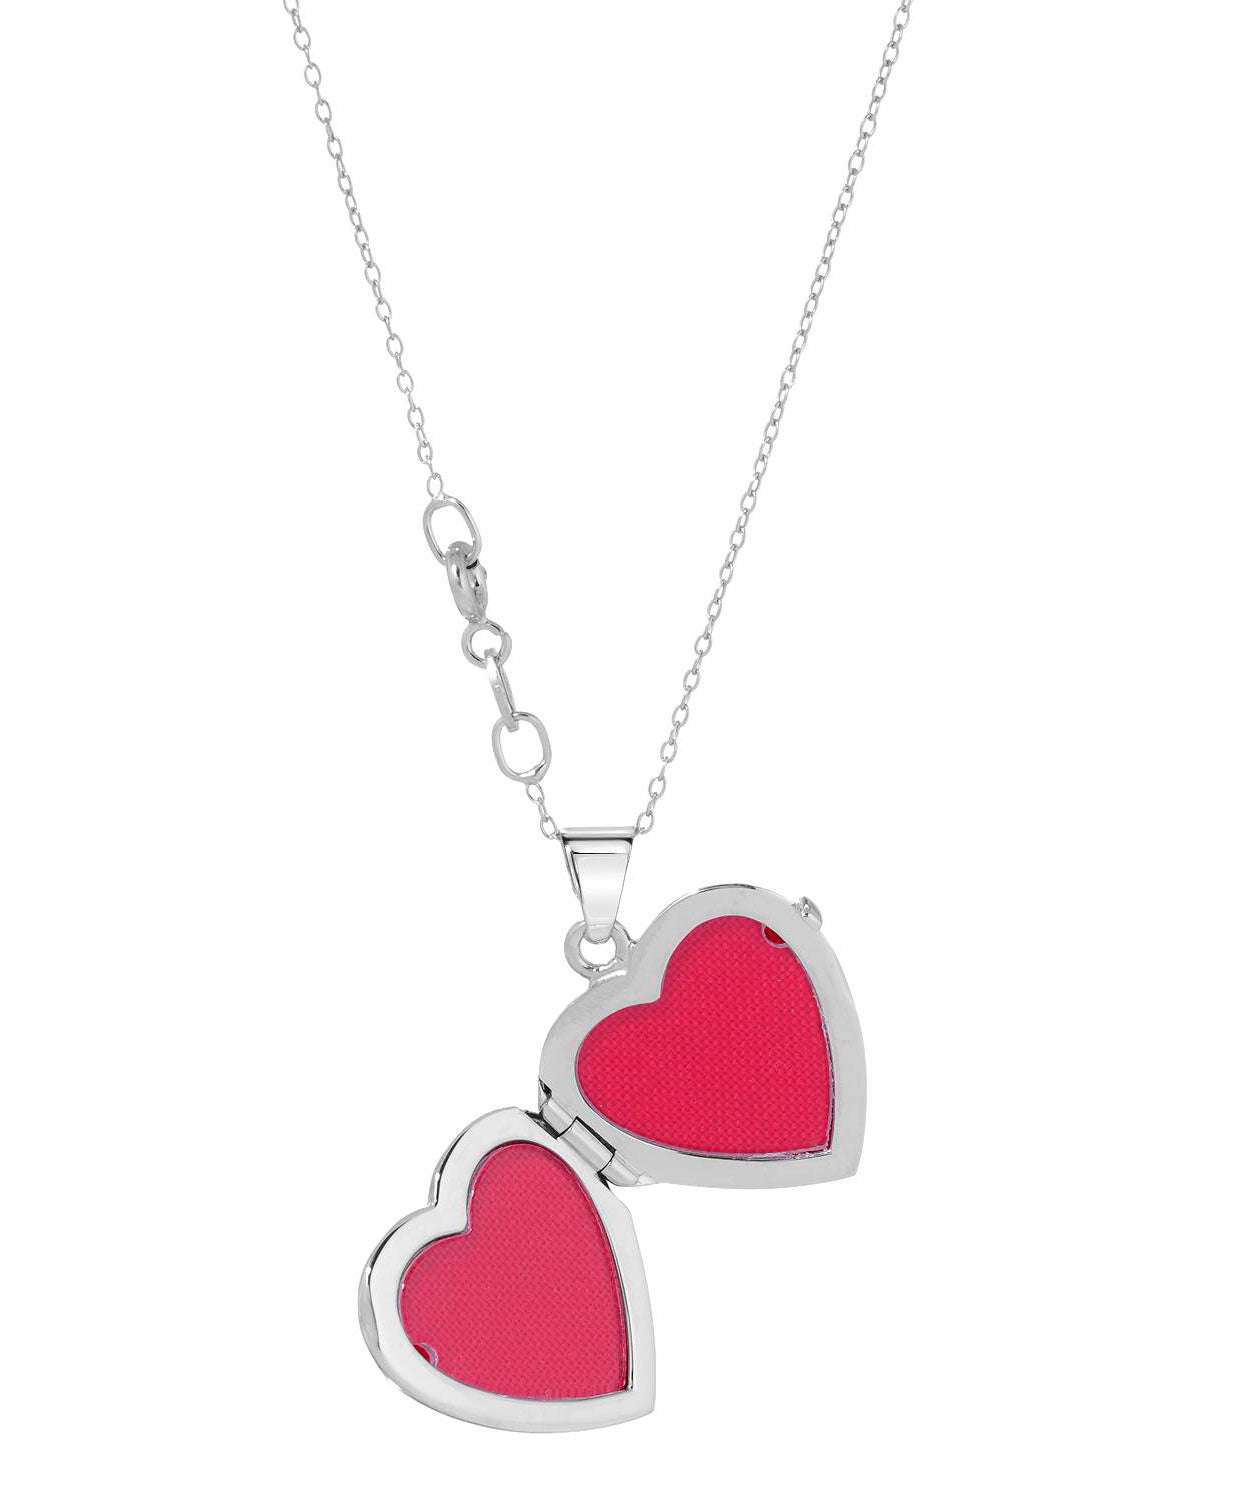 Patterns of Love Collection Brilliant Cut Cubic Zirconia Rhodium Plated 925 Sterling Silver Heart Locket Pendant With Chain - Made in Italy View 3